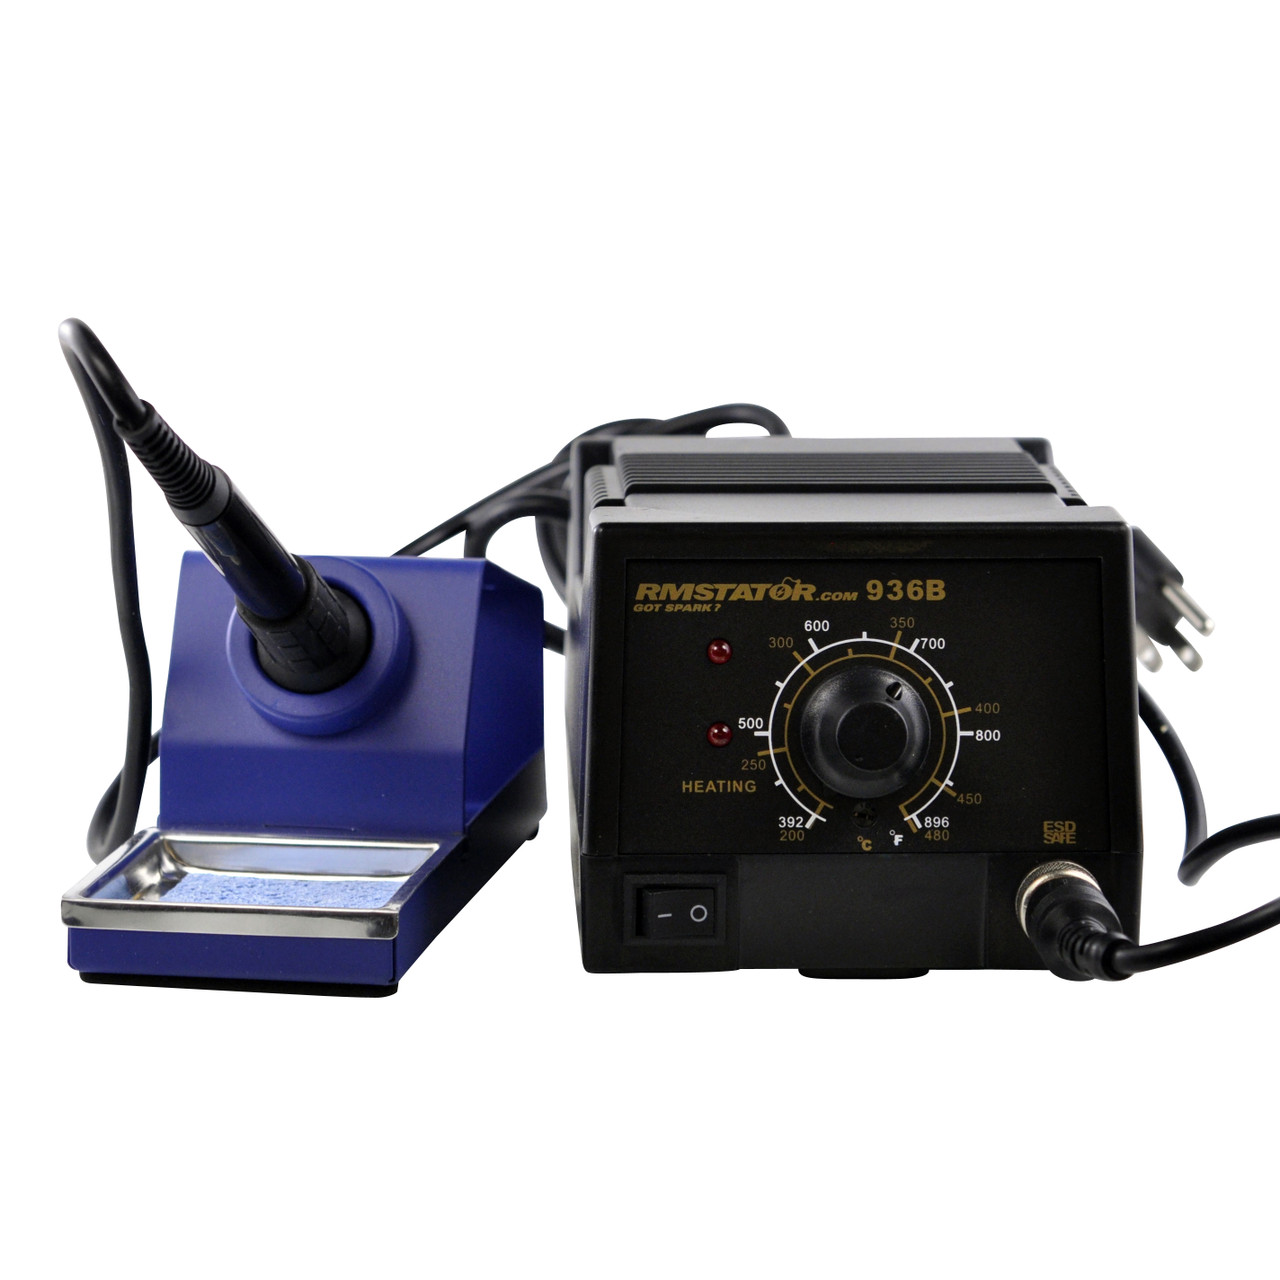 RMSTATOR New Aftermarket Universal Brand New Soldering Station Universal Tool 110 V / 70 W, RMS200-102963